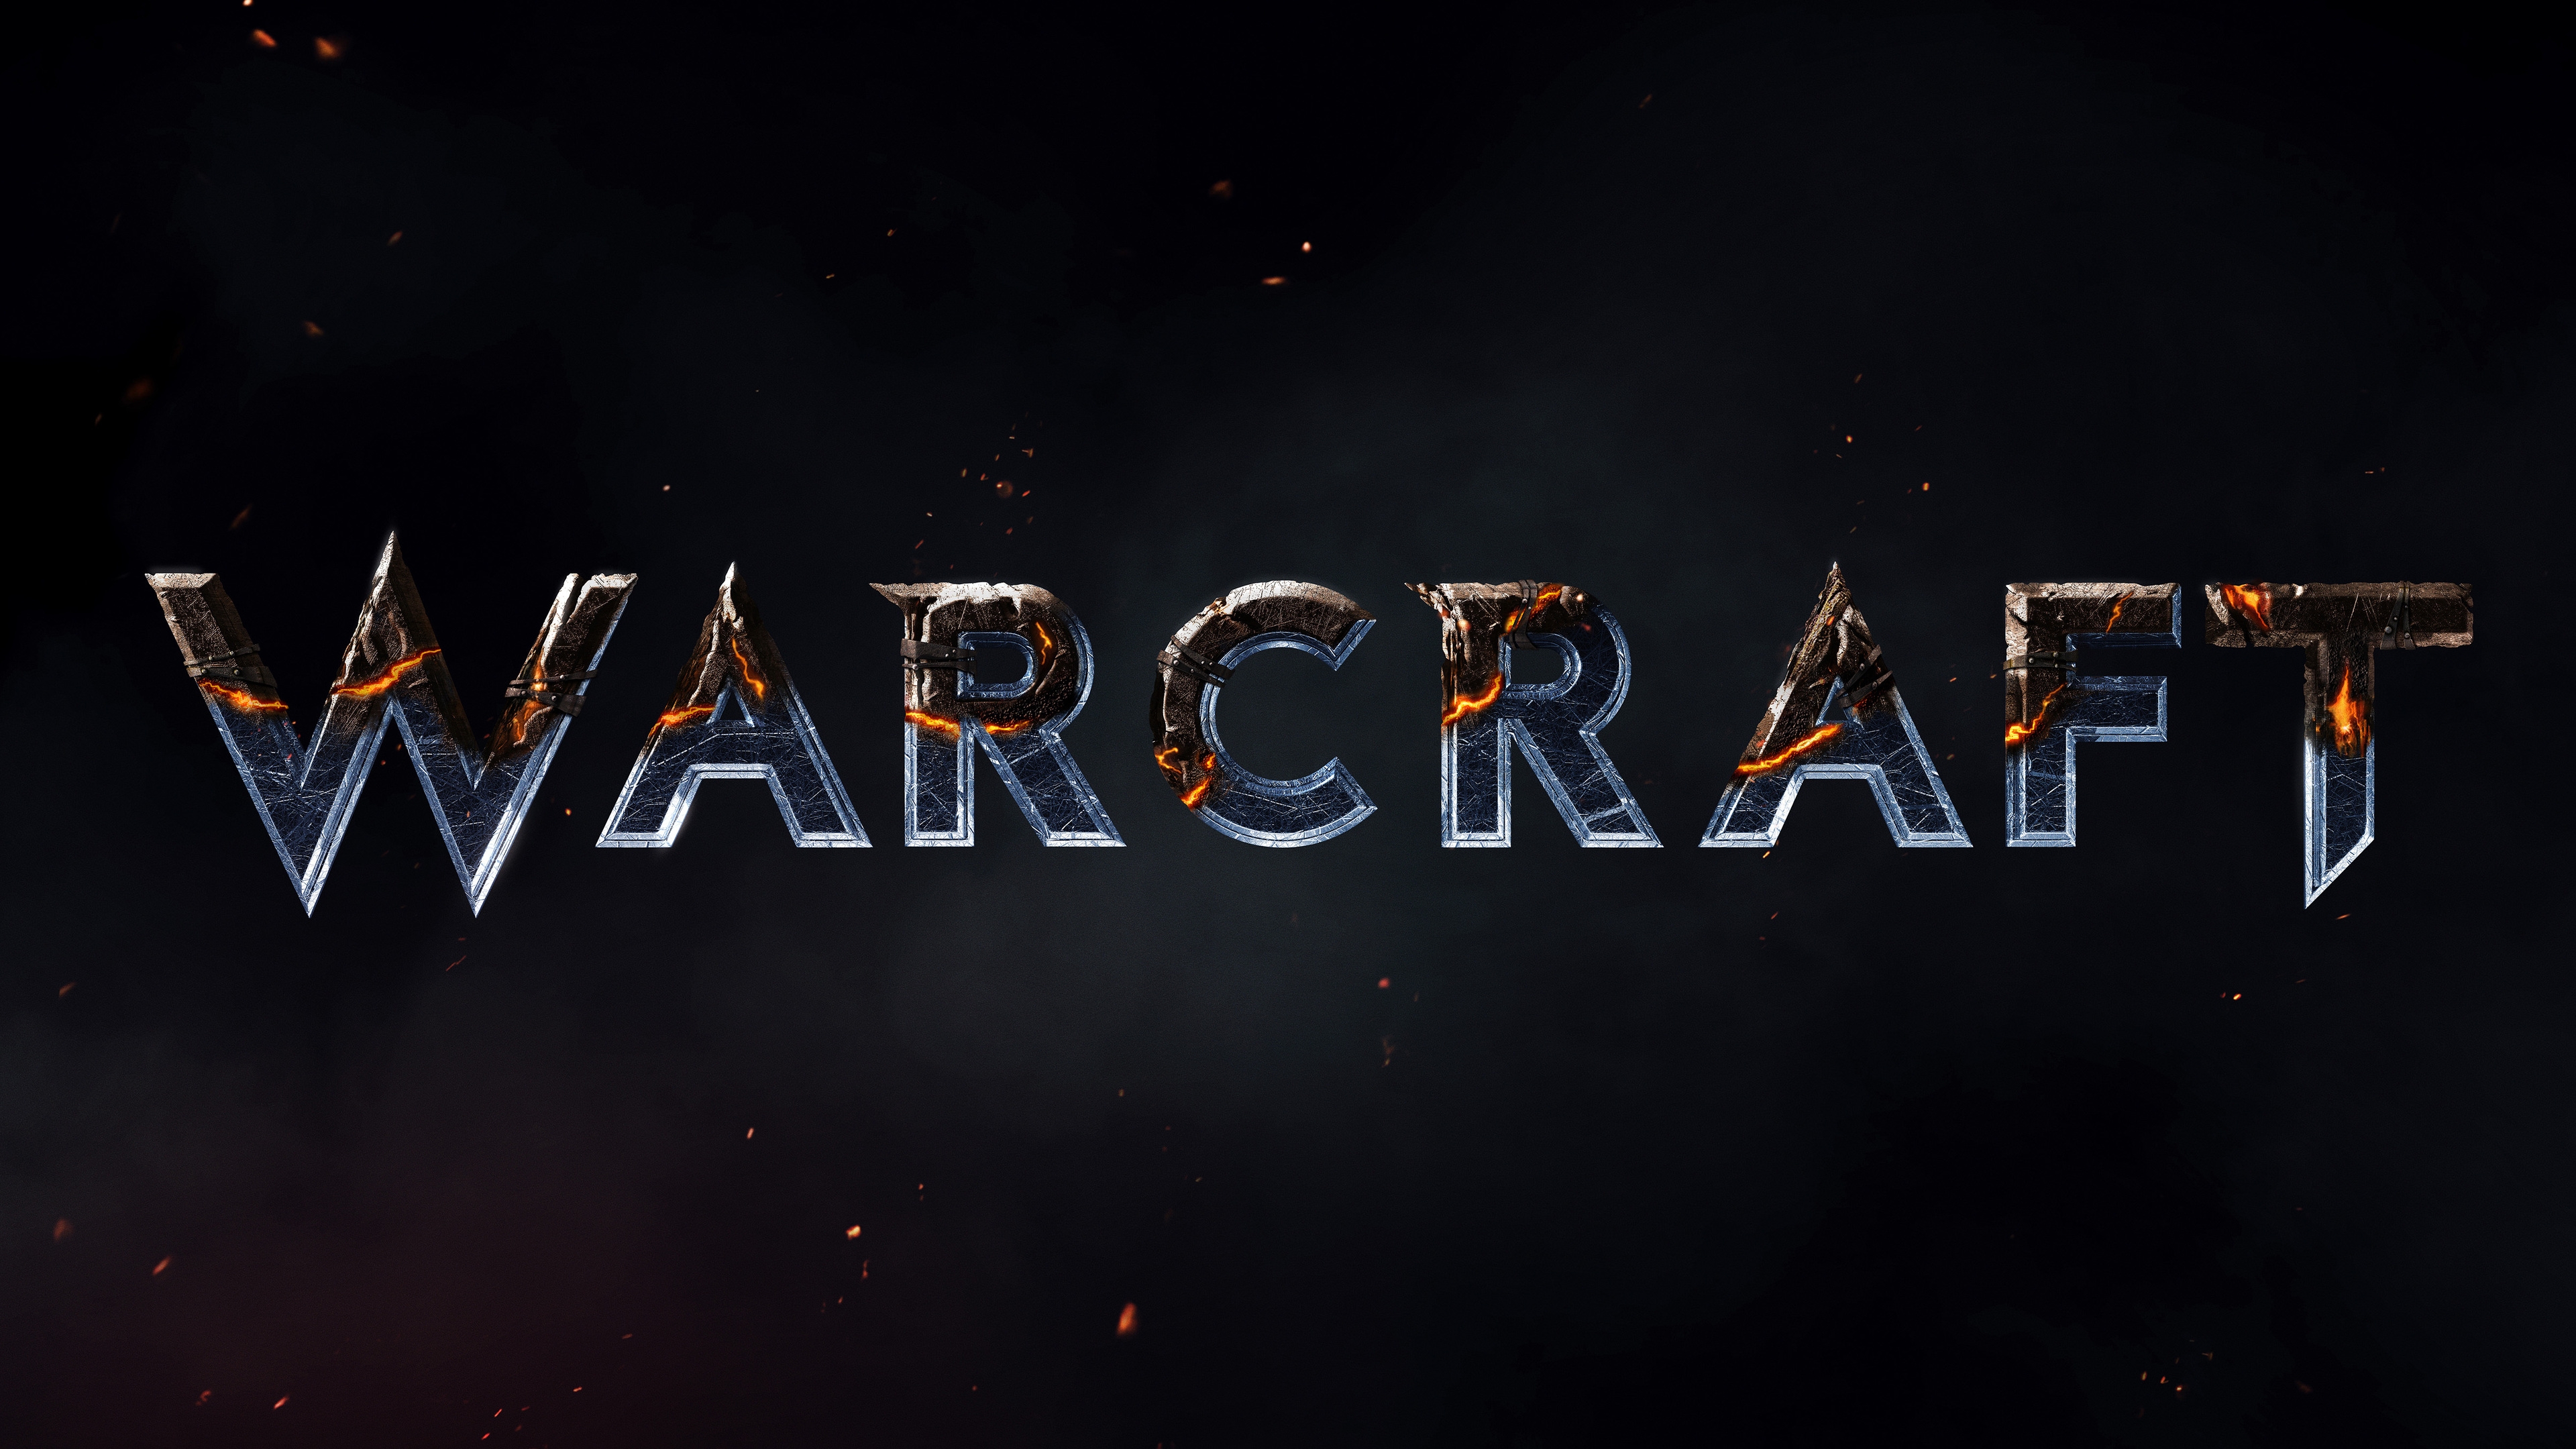 Warcraft Movie 2016 for 3840 x 2160 Ultra HD resolution